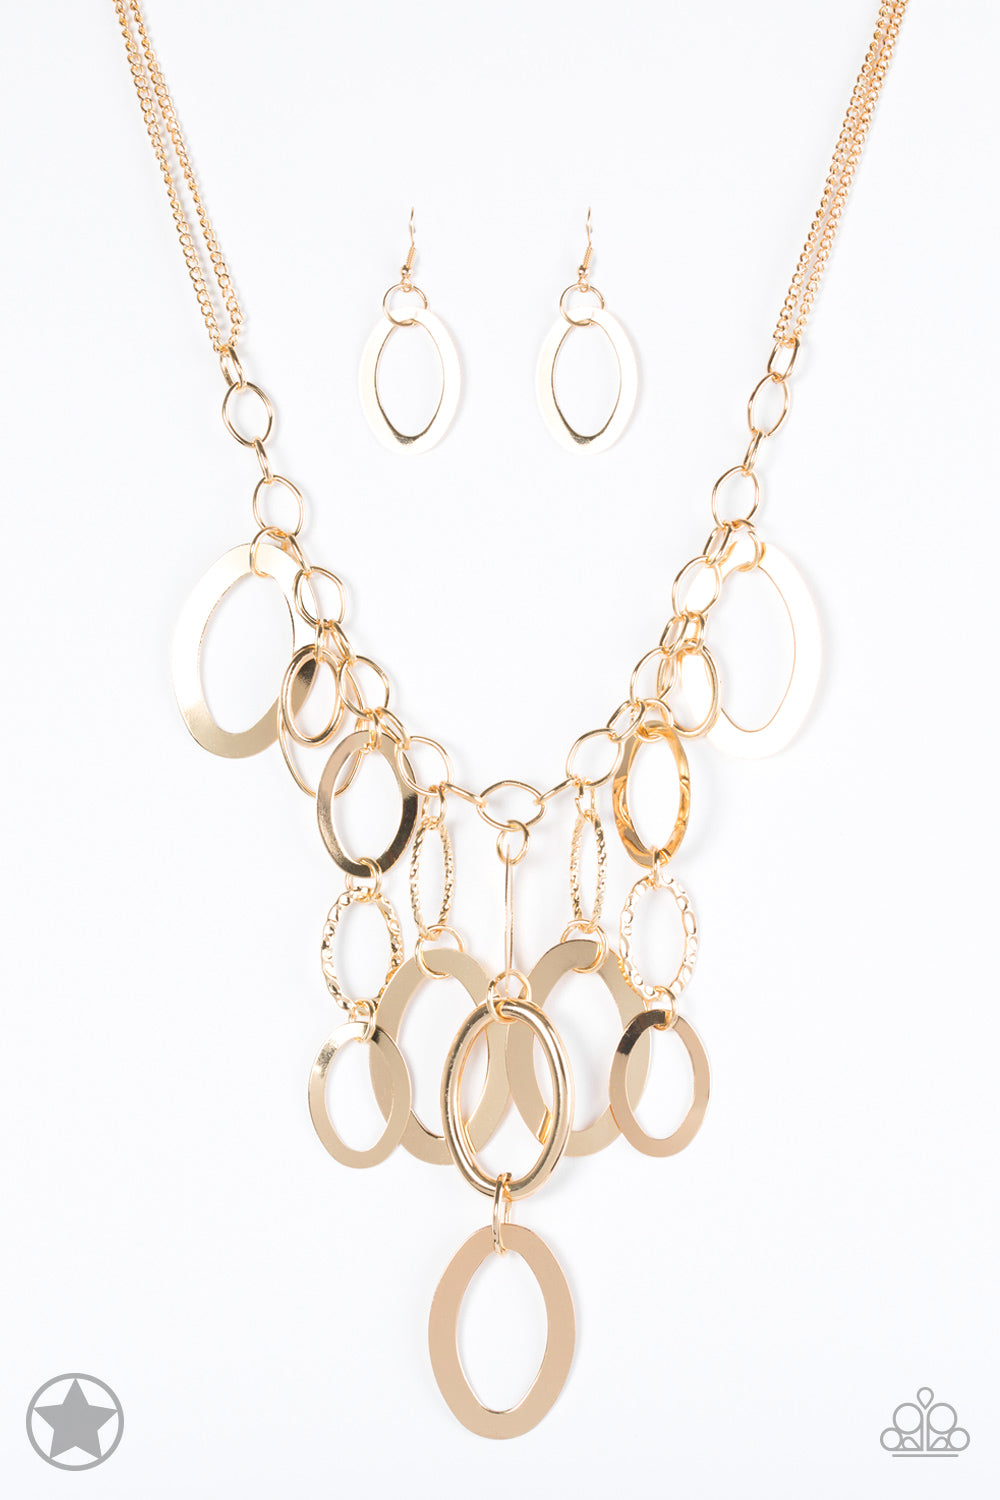 A Golden Spell Gold Paparazzi Necklace Cashmere Pink Jewels - Cashmere Pink Jewels & Accessories, Cashmere Pink Jewels & Accessories - Paparazzi